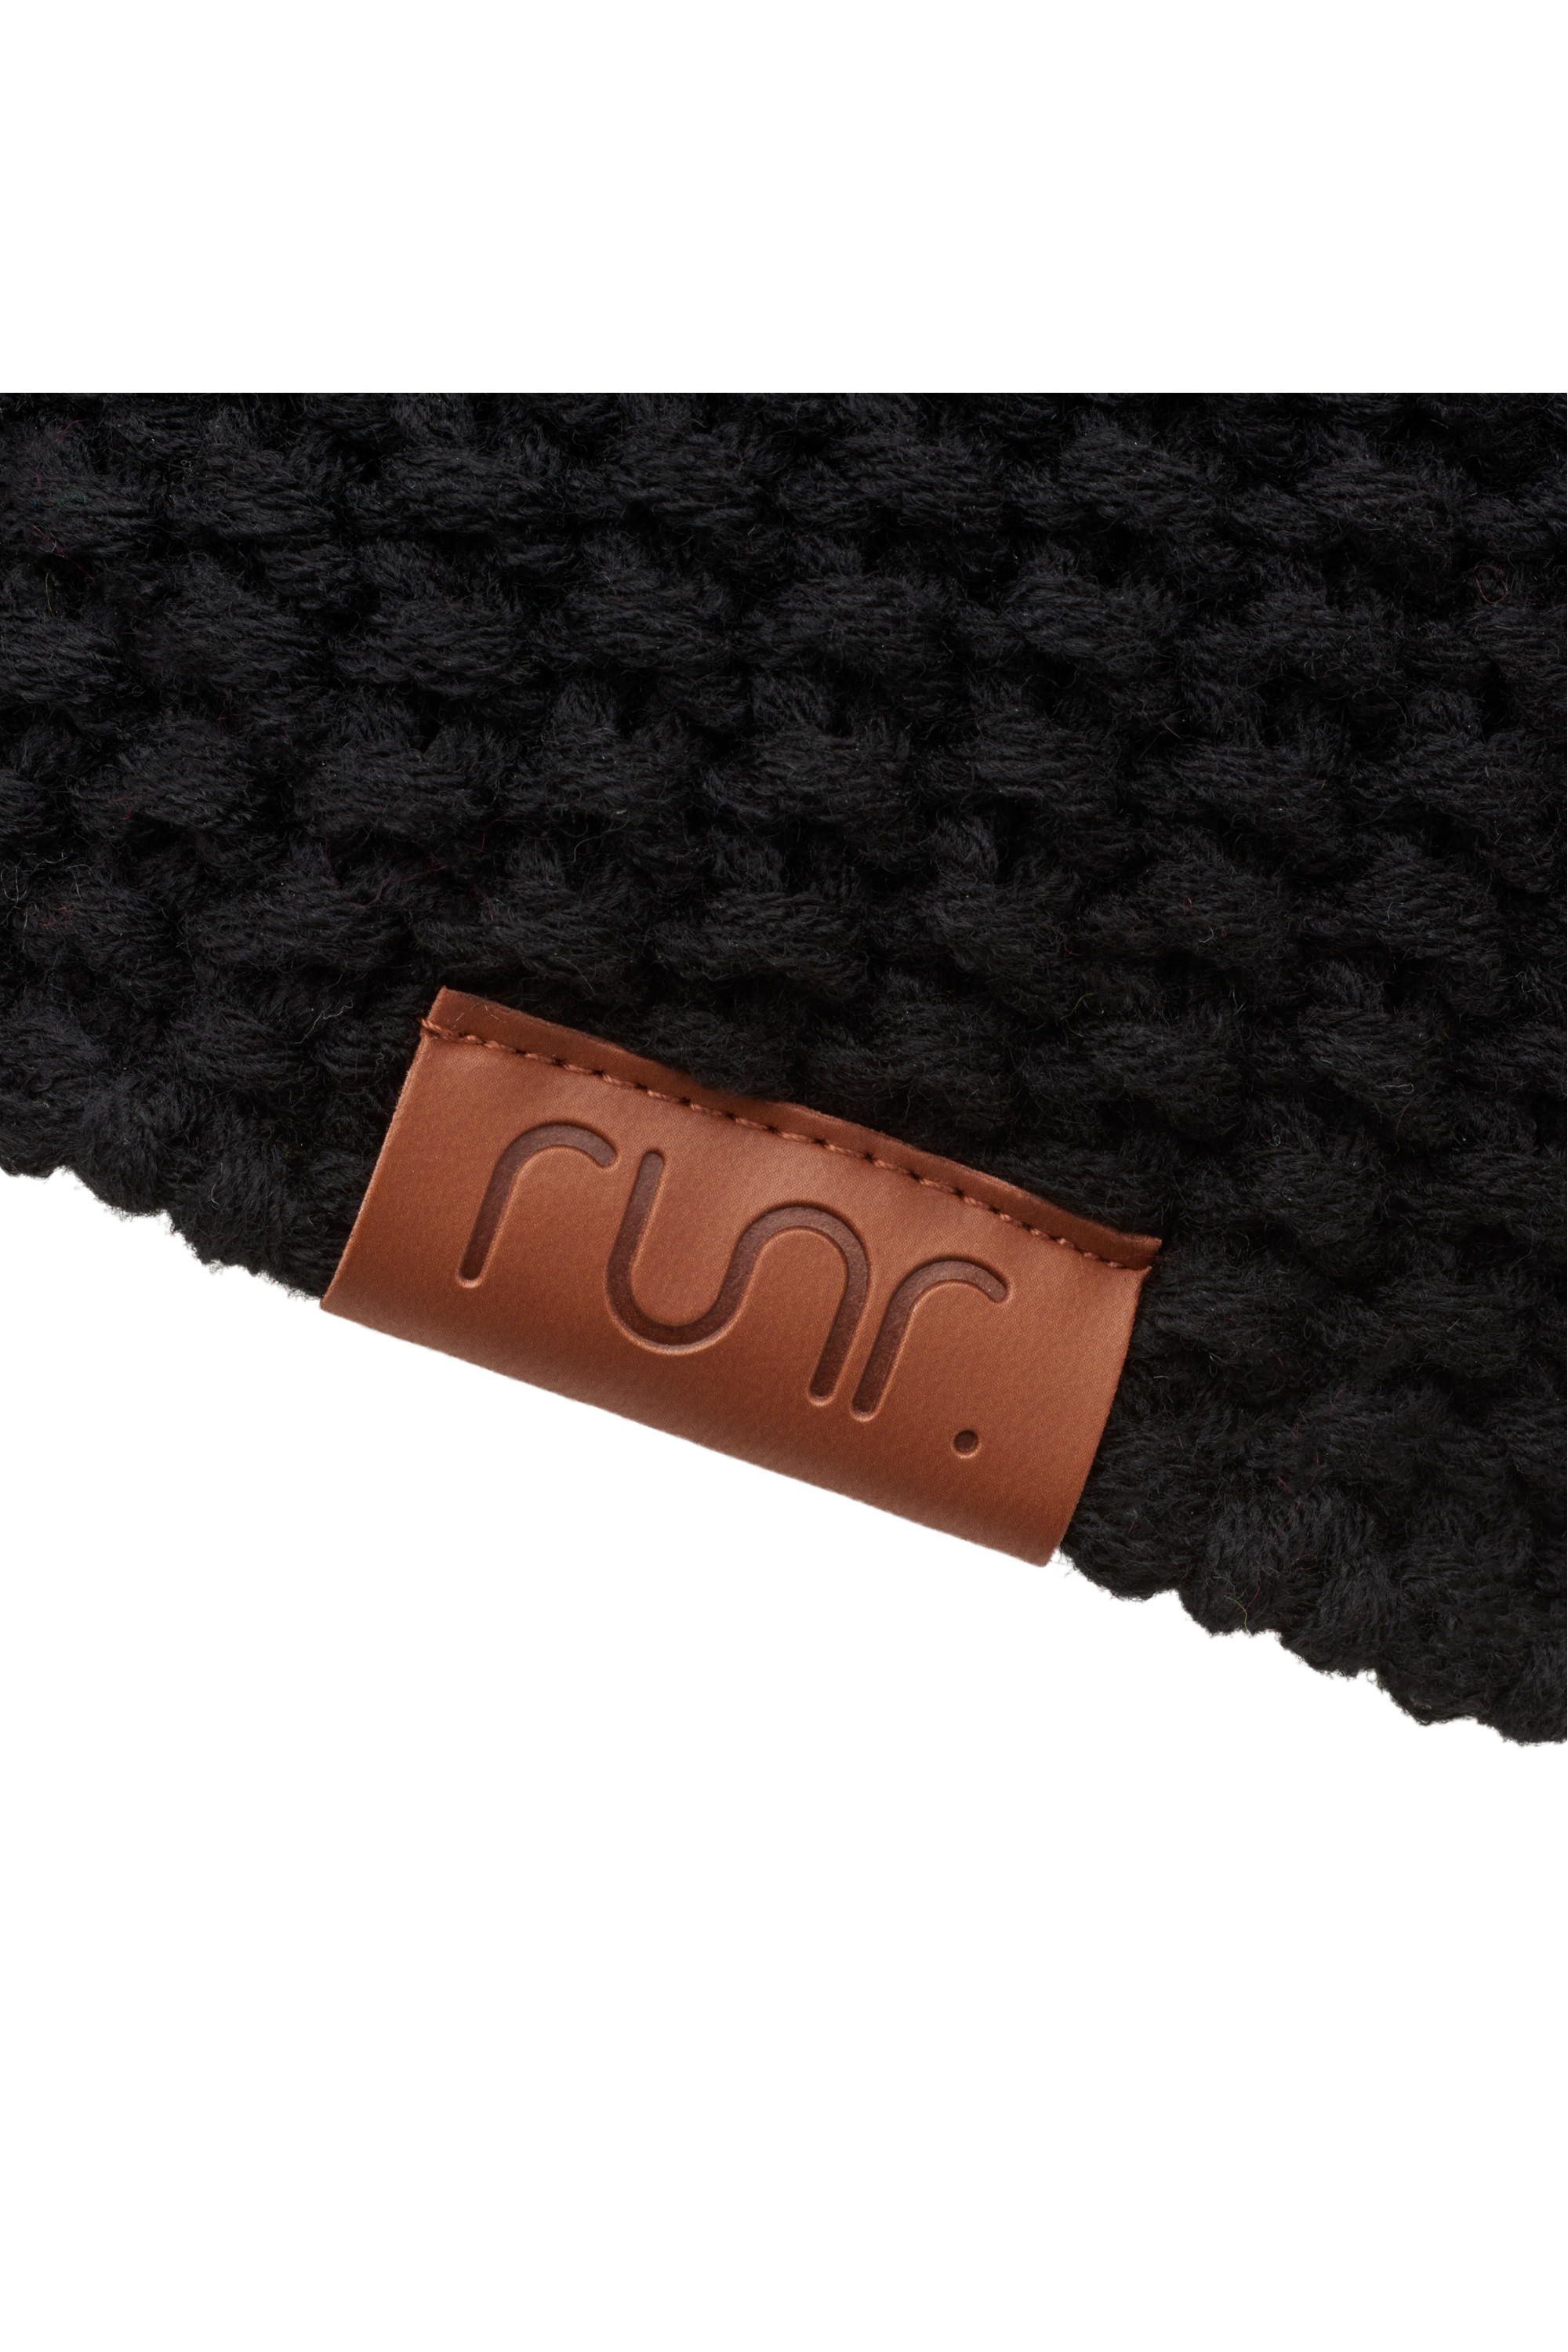 Runr Lake Louise Headband with faux leather tag